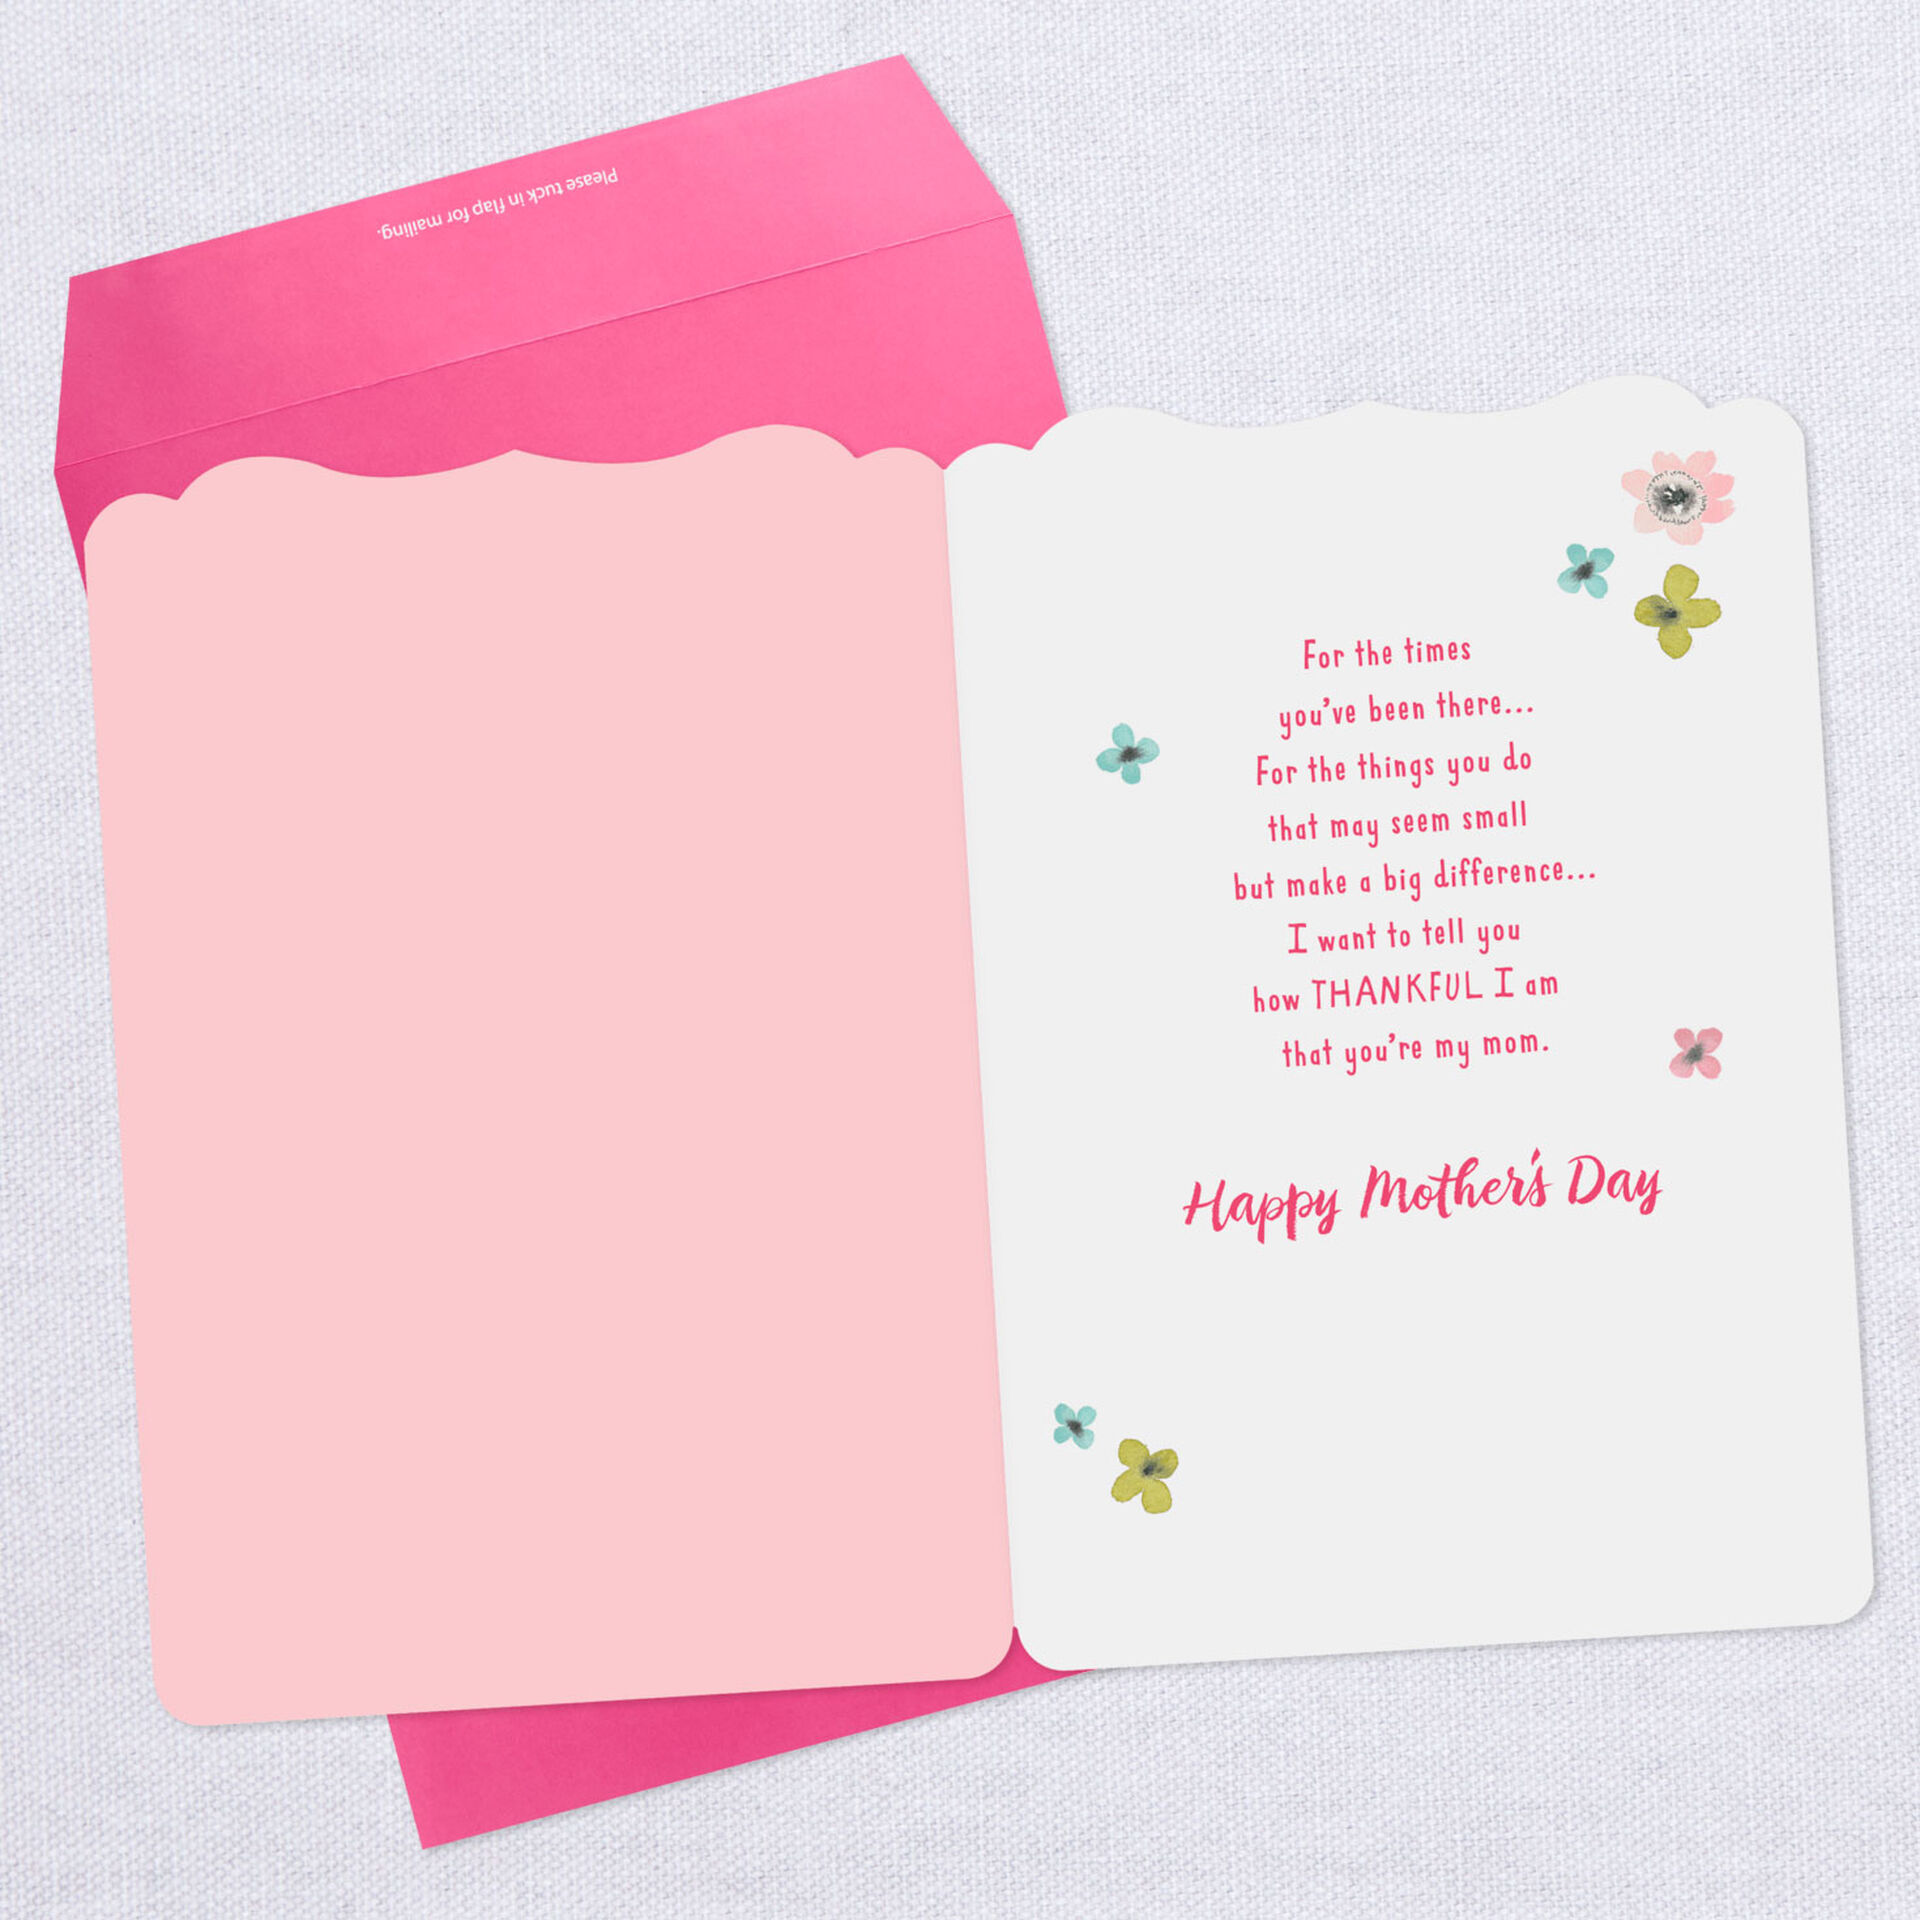 Thankful Youre My Mom Jumbo Mothers Day Card 1925 Greeting Cards